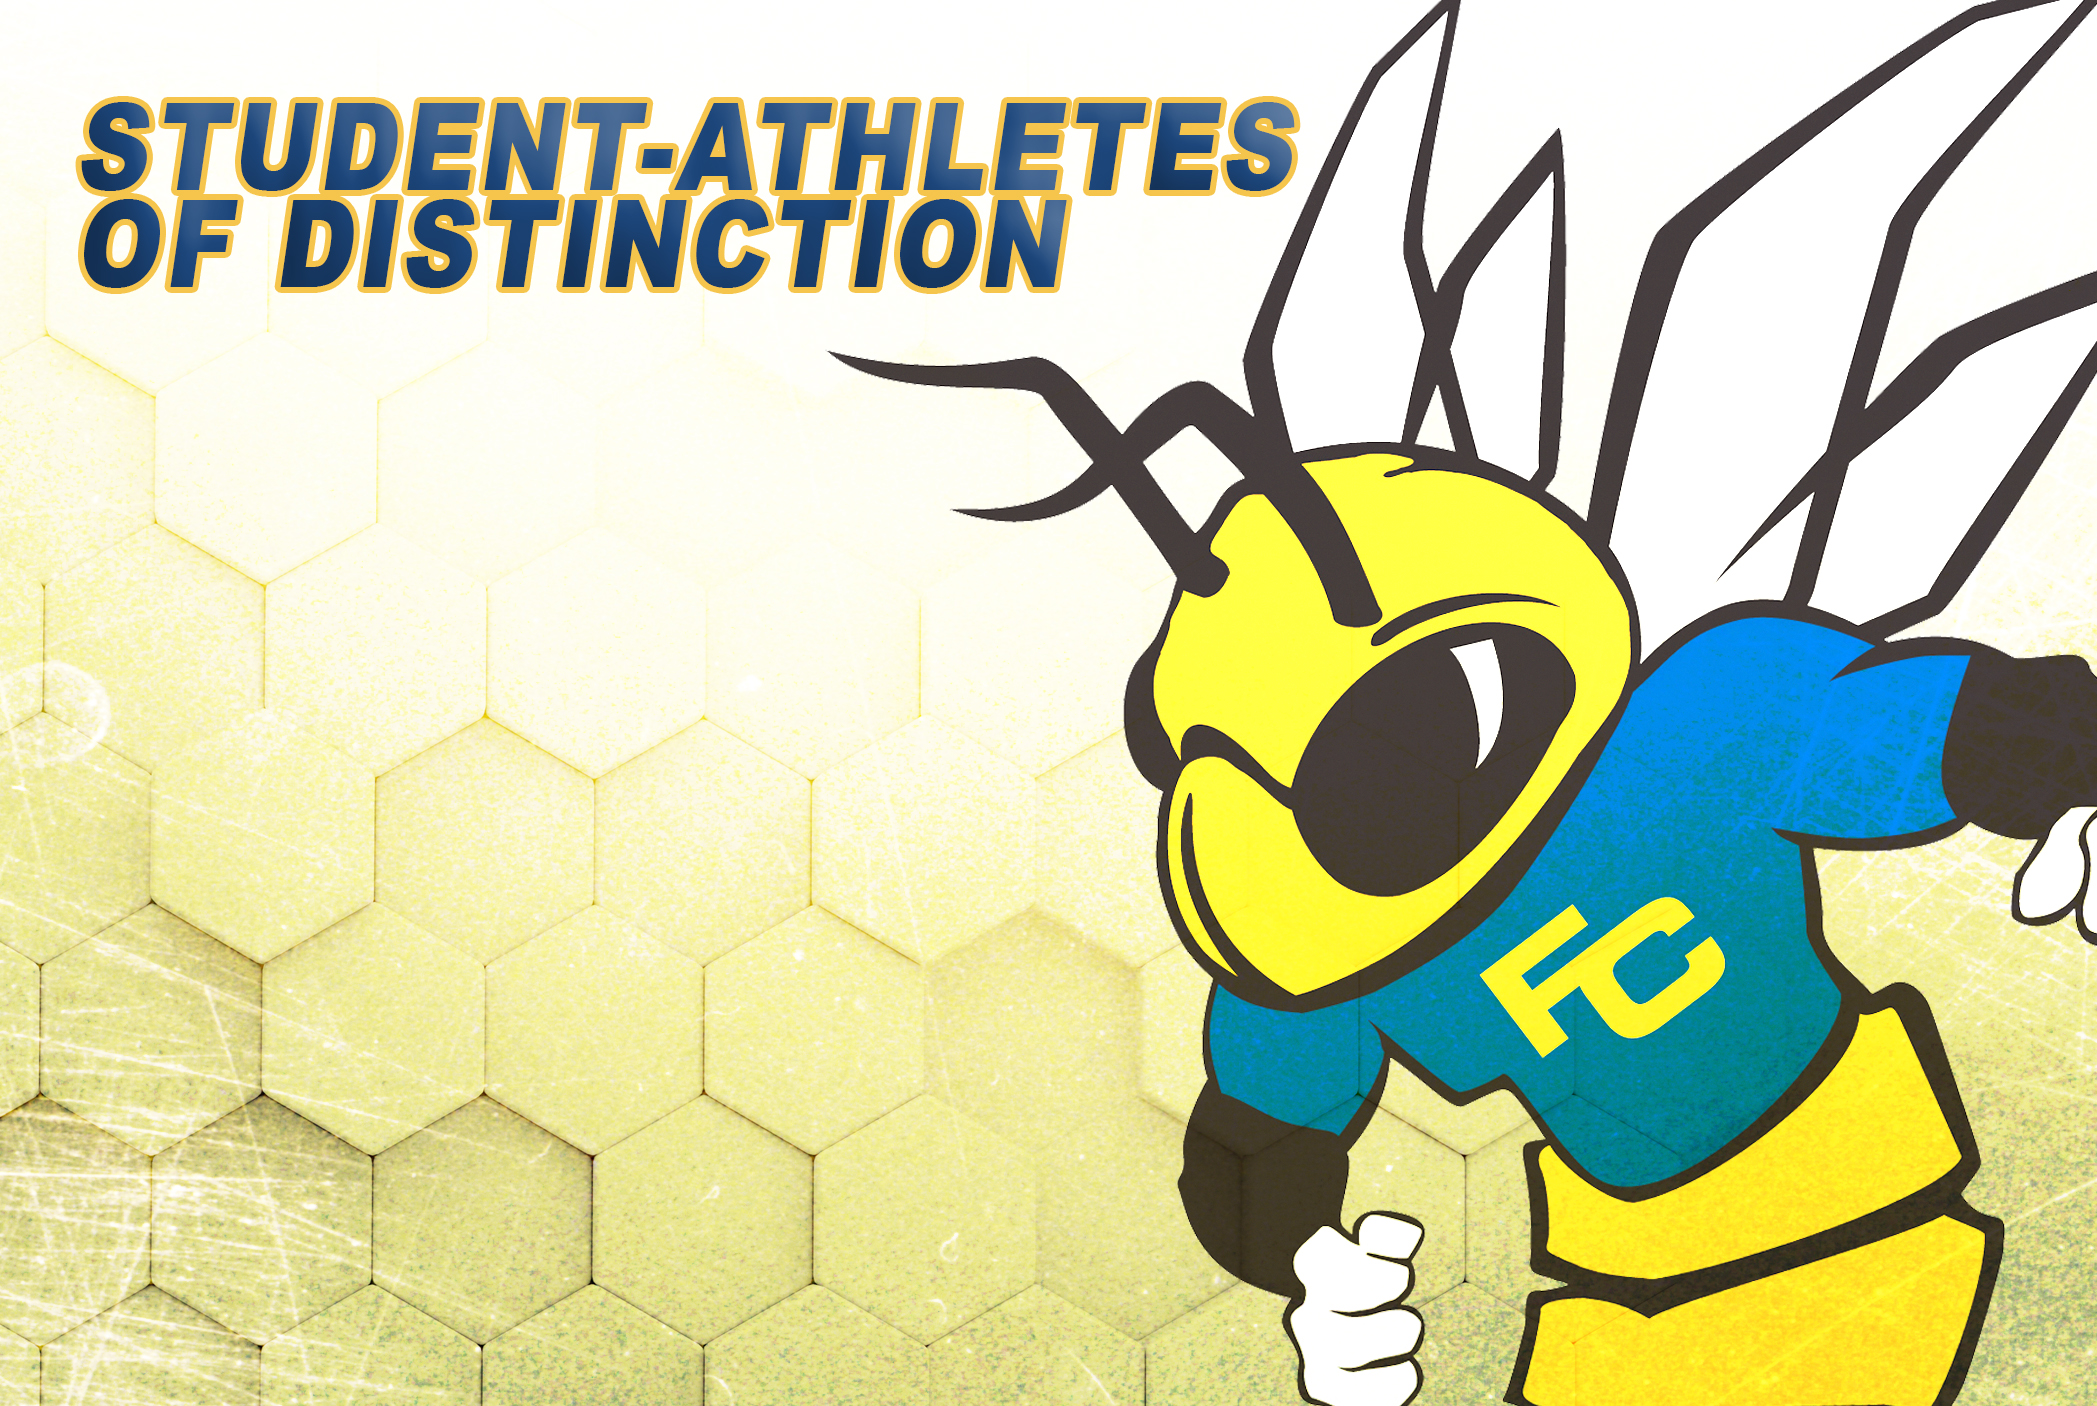 FC STUDENT-ATHLETES TO BE HONORED AS STUDENTS OF DISTINCTION